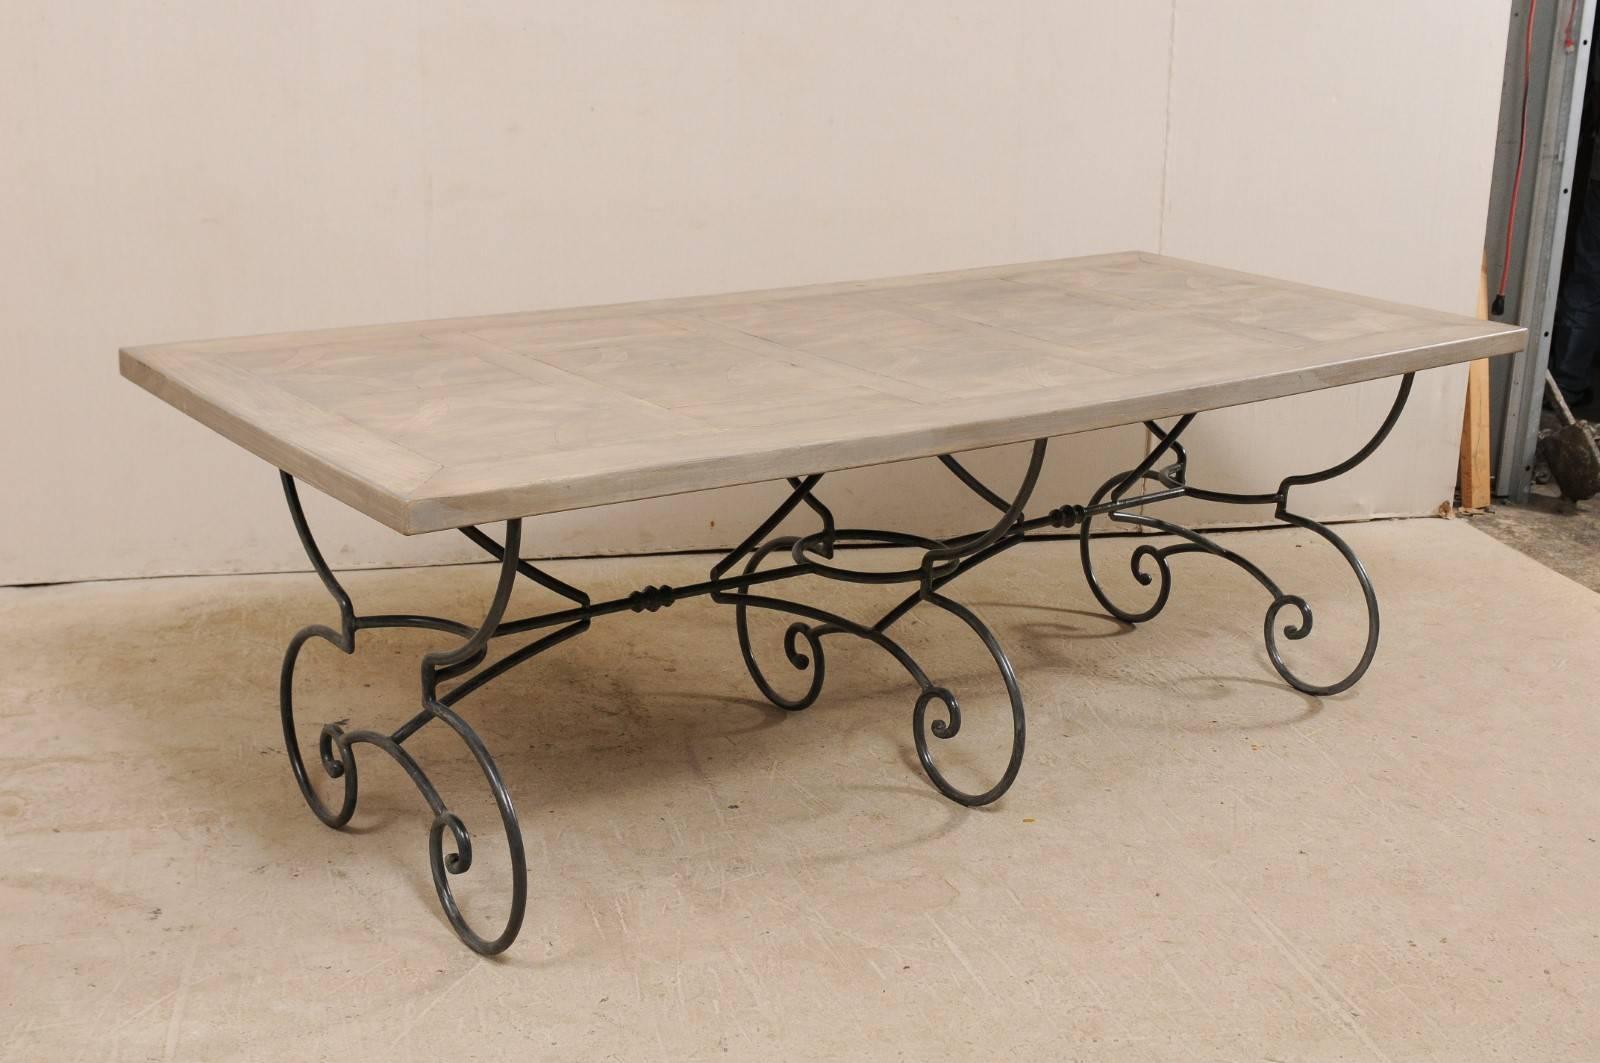 A French mid-20th century wood top table with scrolling iron base. This French vintage table features an inlay wood top, decorated with geometrical patterns framed within its centre, resting upon an ornate iron base. The base of the table is